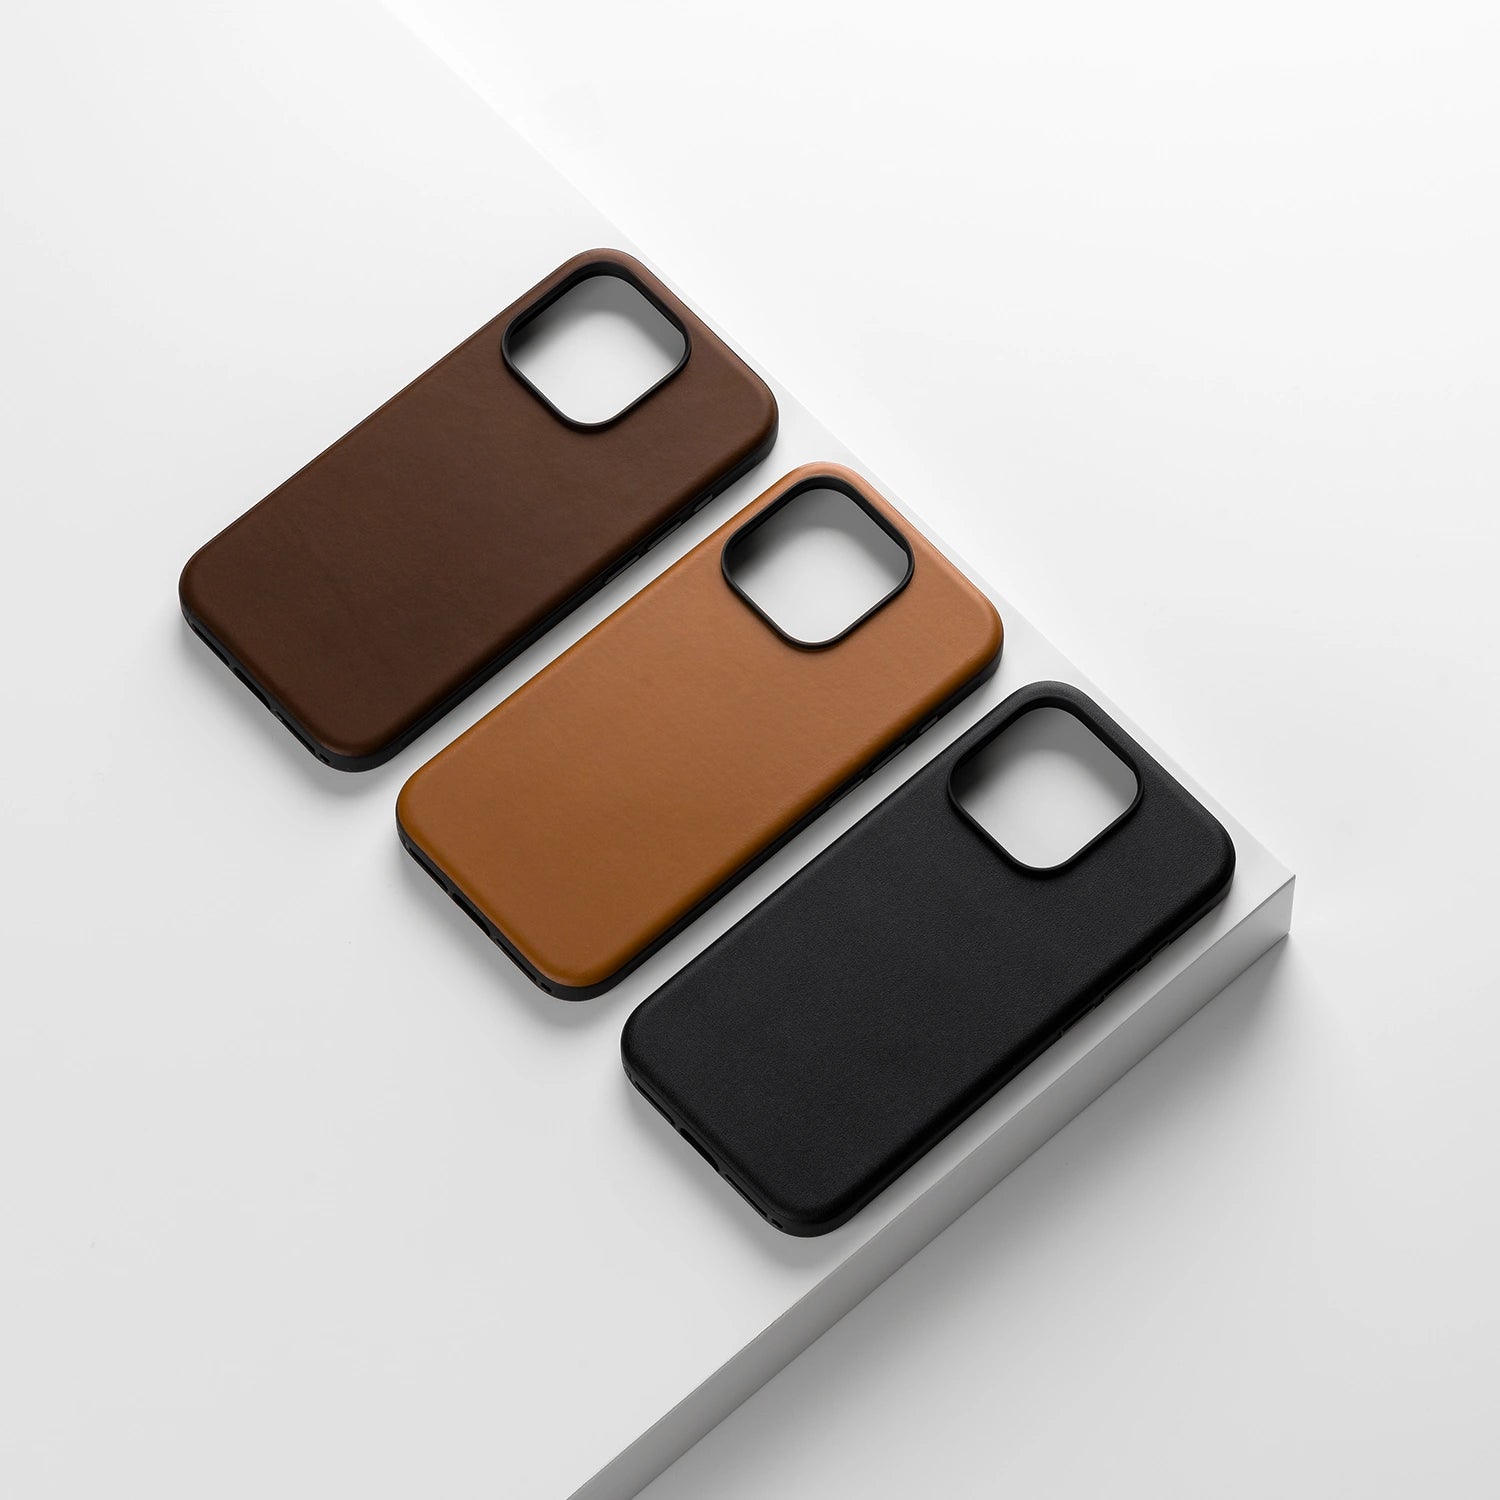 NOMAD Modern Leather Case for iPhone 15 Series By Nomad Leather